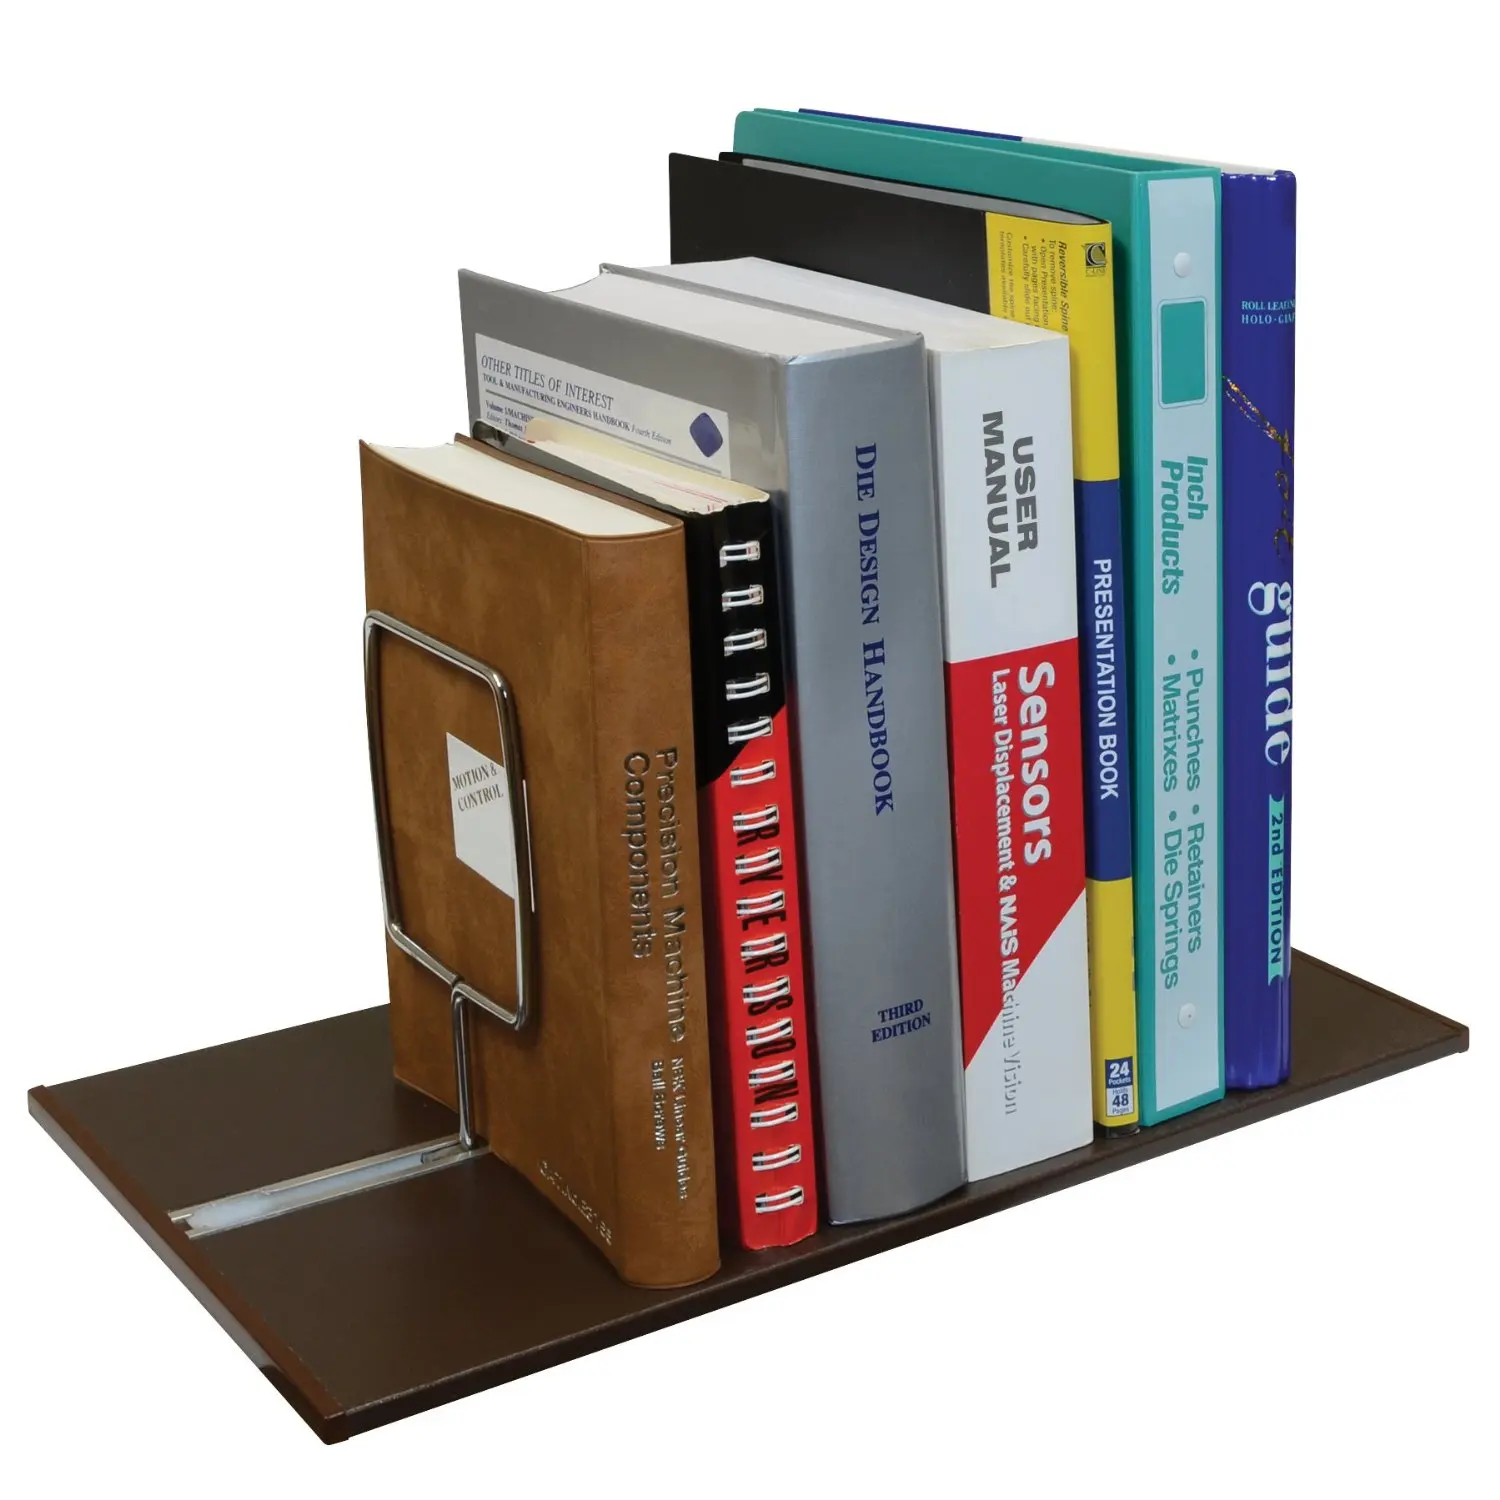 Book Standart. Price book. The deal book. Books support